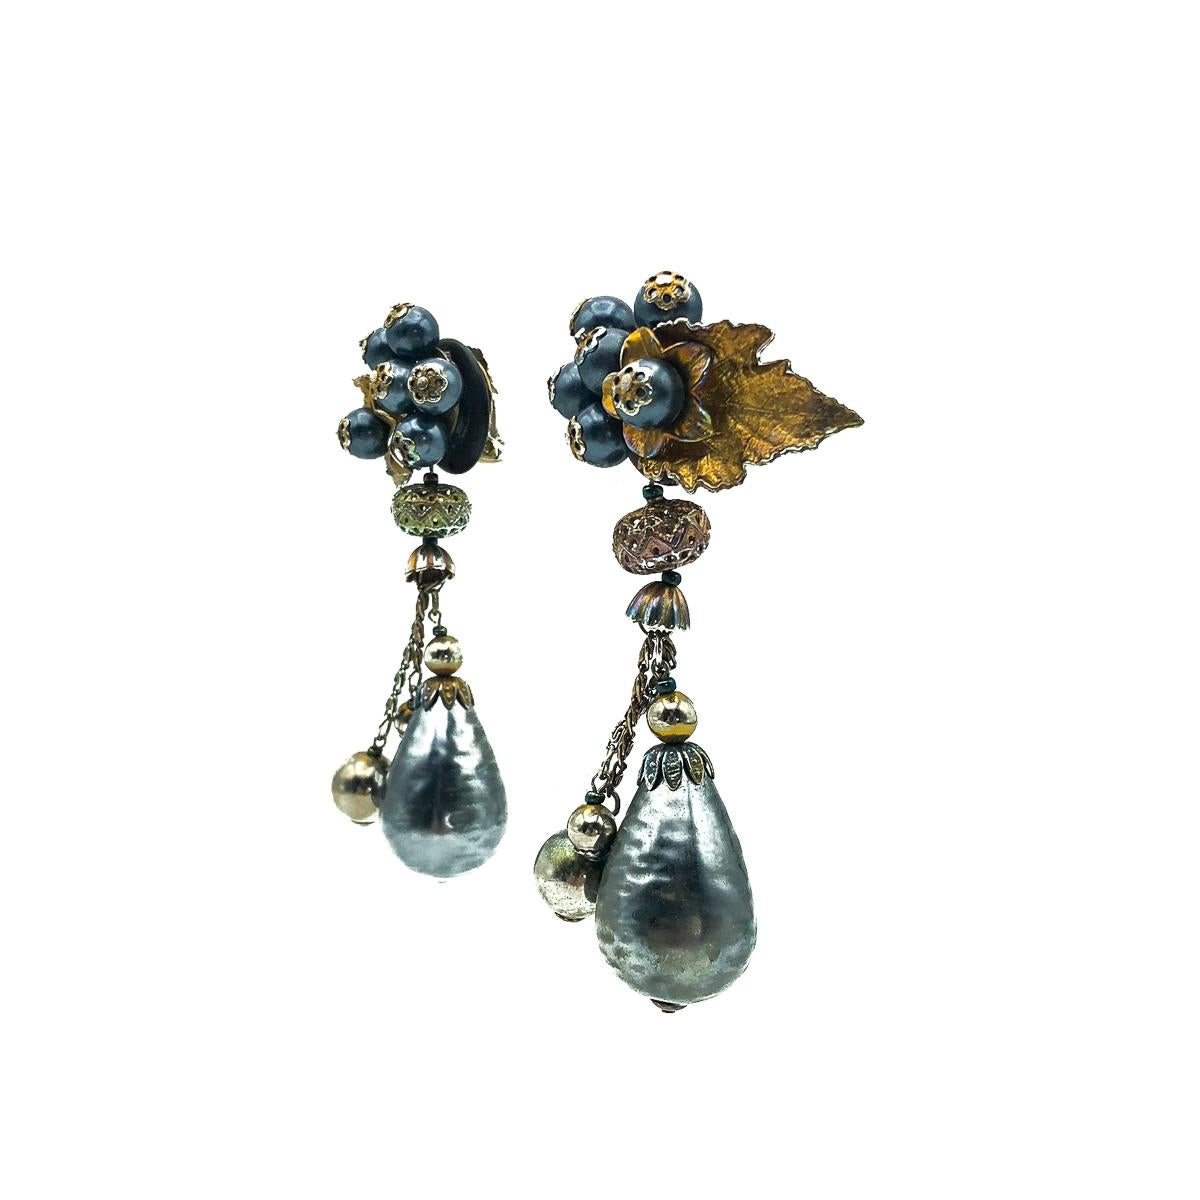 A wonderfully unique pair of vintage statement metallic earrings. Featuring an eye-catching array of metallic tones with floral inspiration. 
Vintage Condition: Very good without damage or noteworthy wear. 
Materials: Lacquered resin beads,